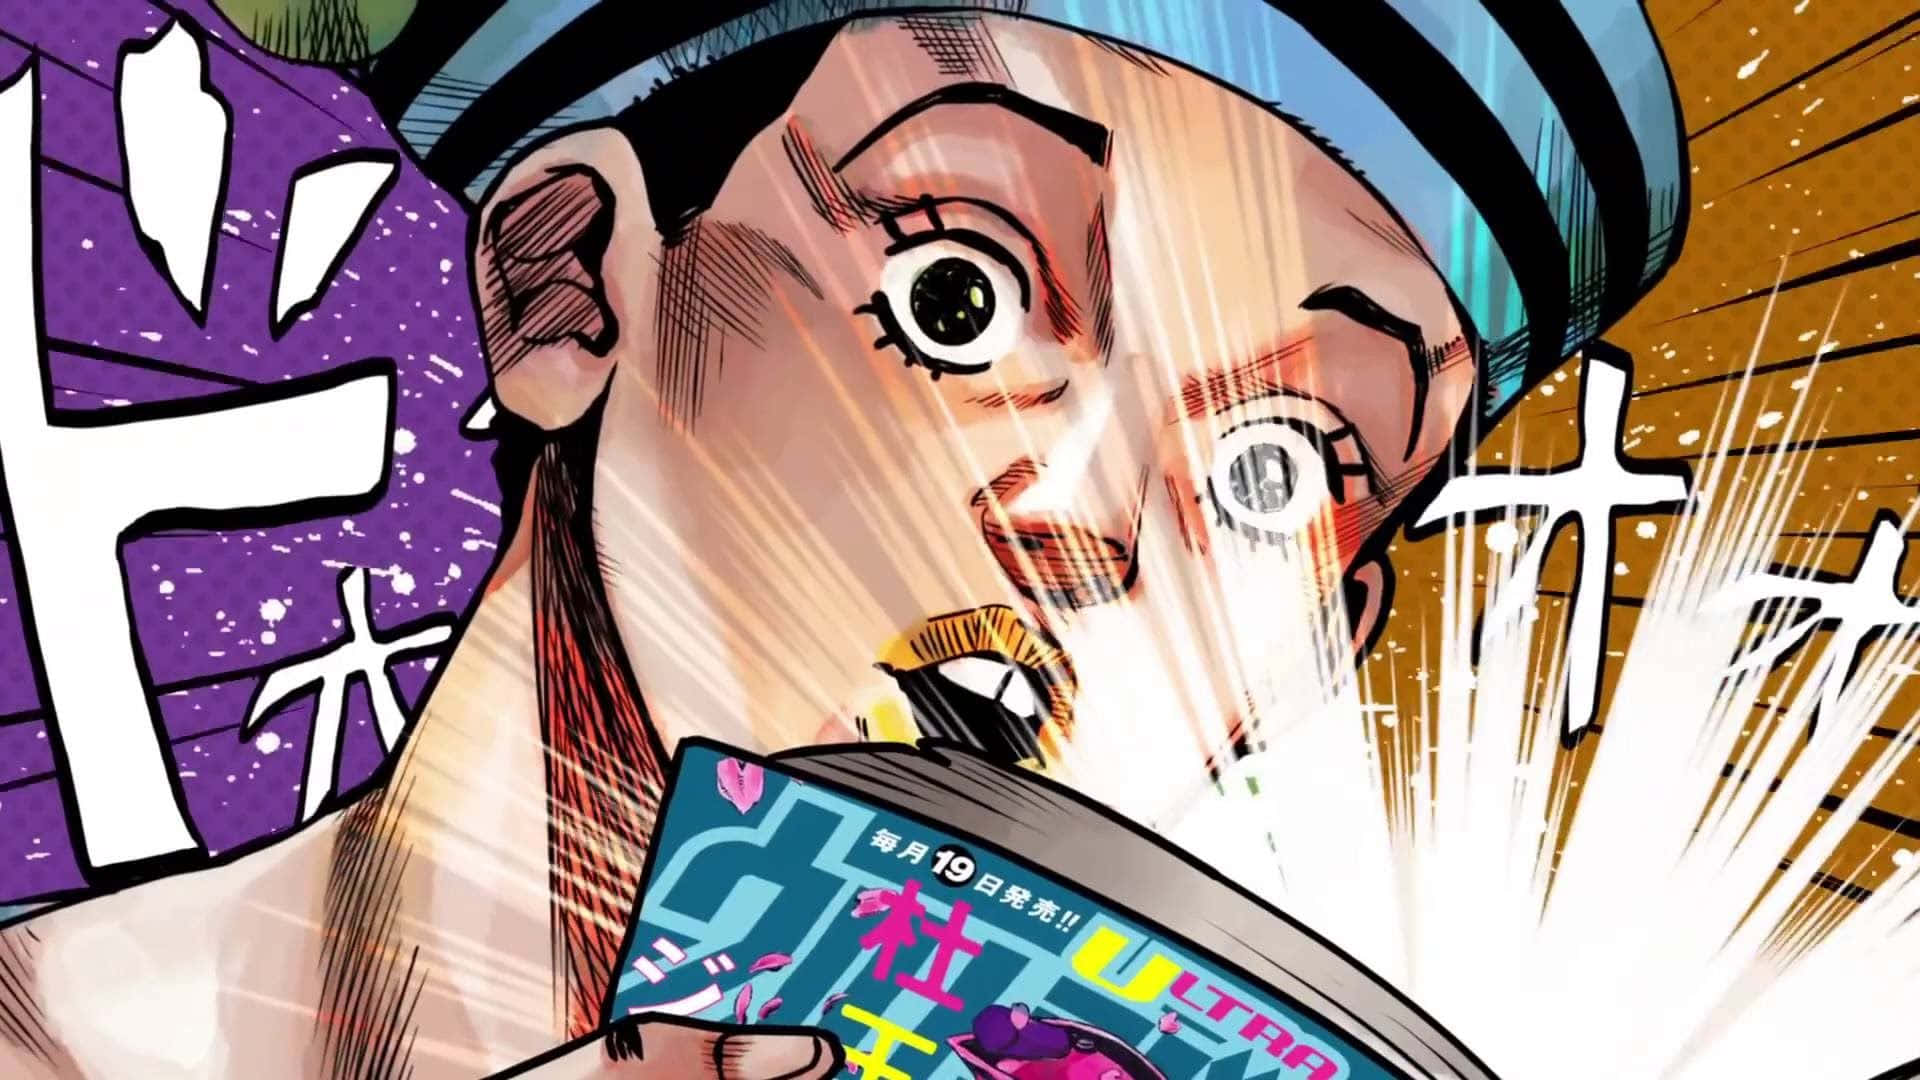 Gappy, the protagonist of Jojolion, unleashes his Stand Wallpaper